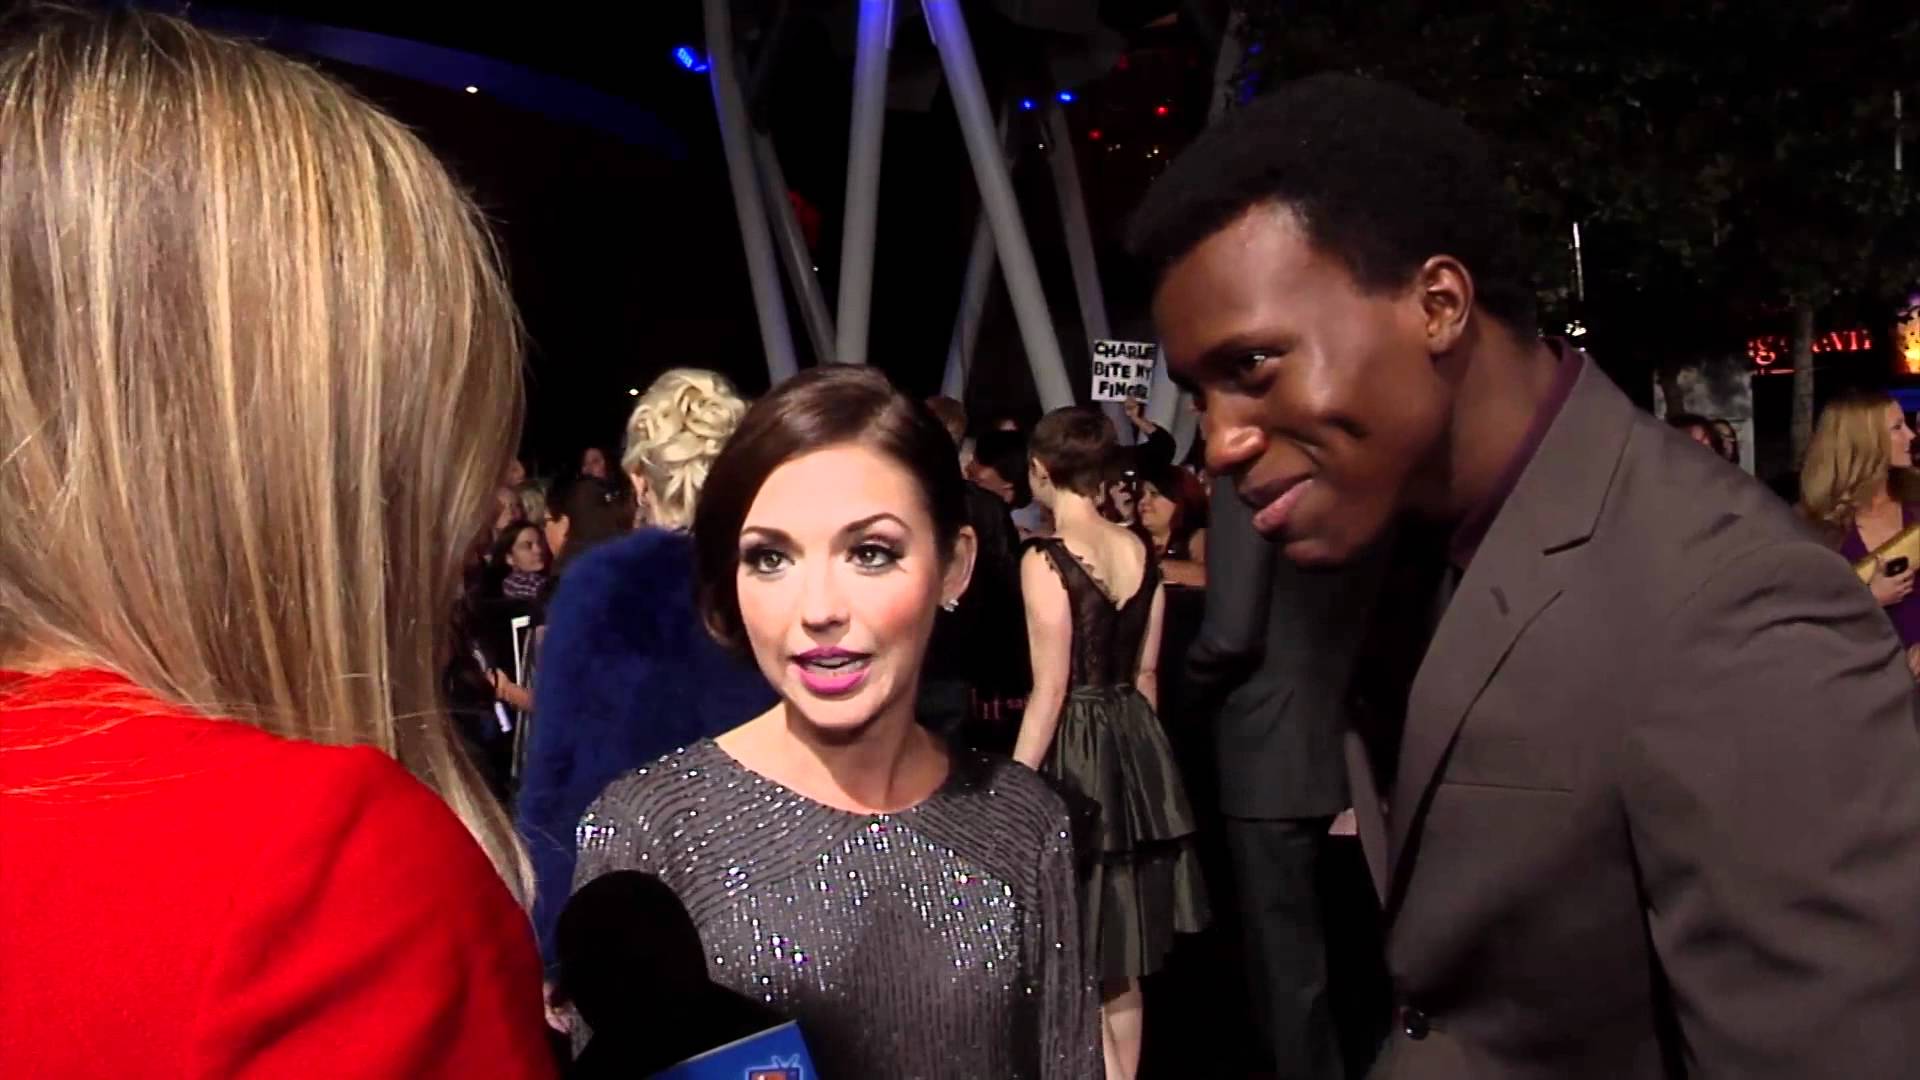 Janelle Froehlich and Amadou Ly. The Twilight Saga: Breaking Dawn - Part 1 Premiere, Nokia Theatre L.A. Live.